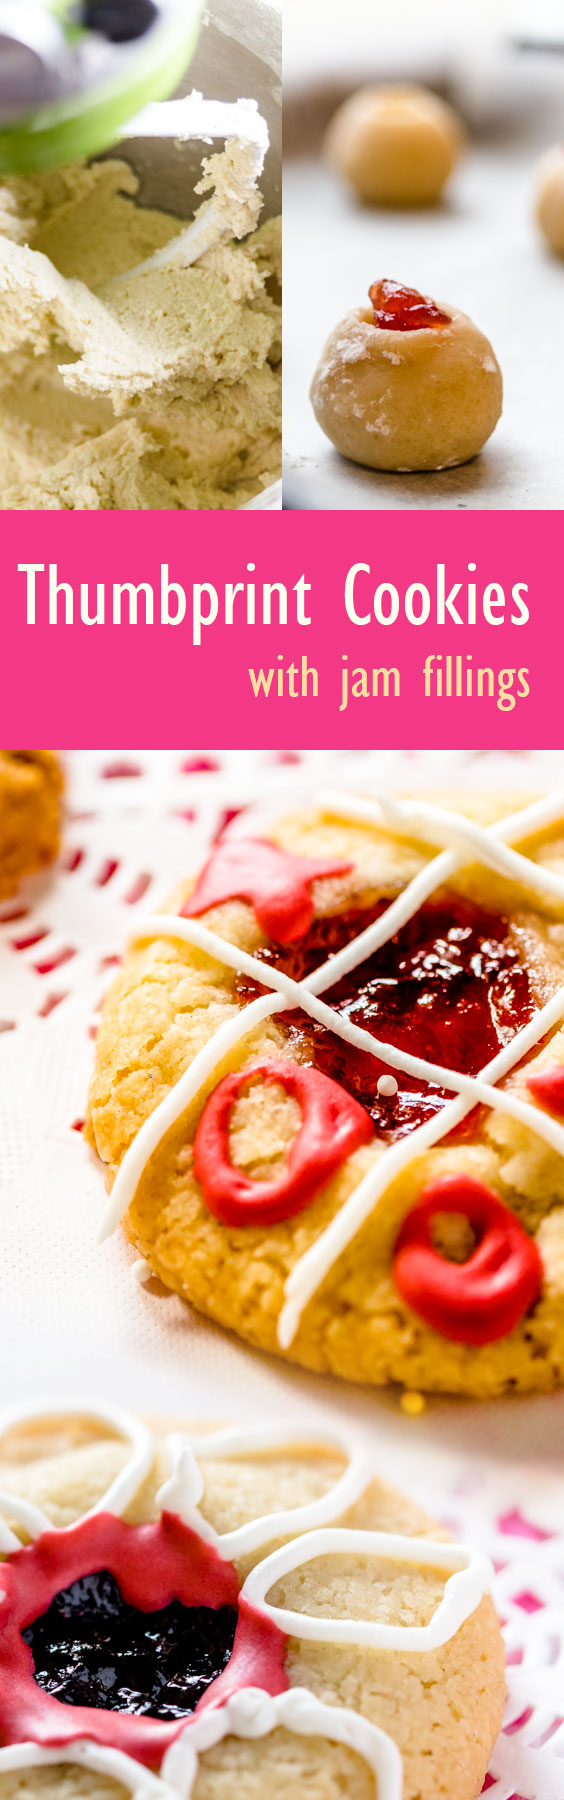 Easy short bread thumbprint recipe for your next holiday (Fill with jam)